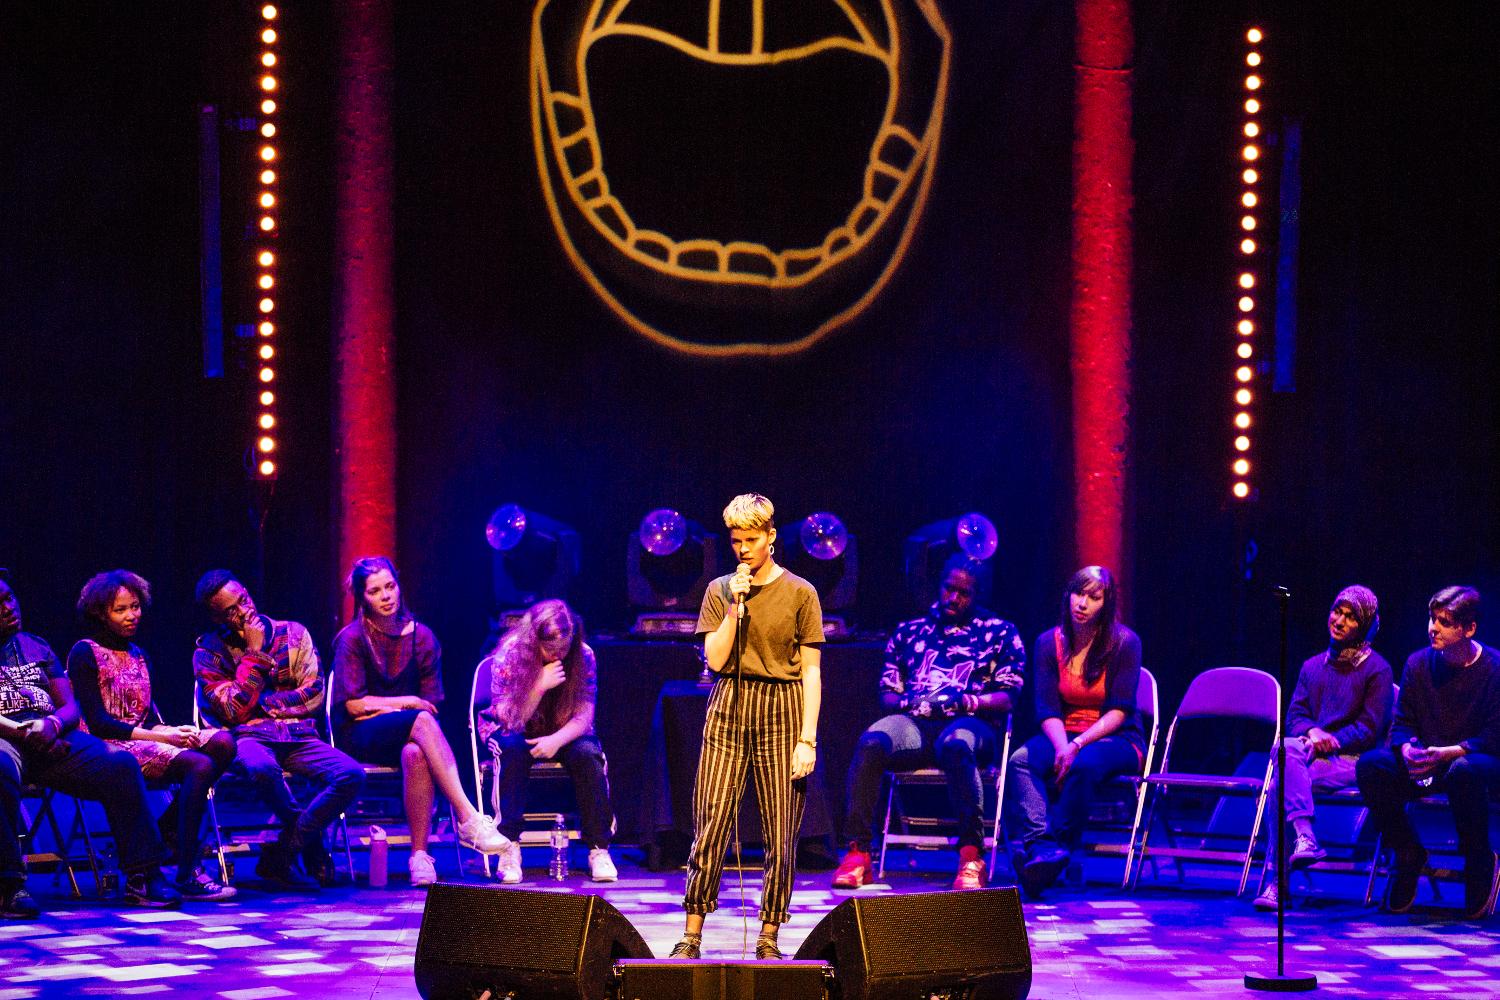 A poetry slam at the Roundhouse as part of the Last Word festival